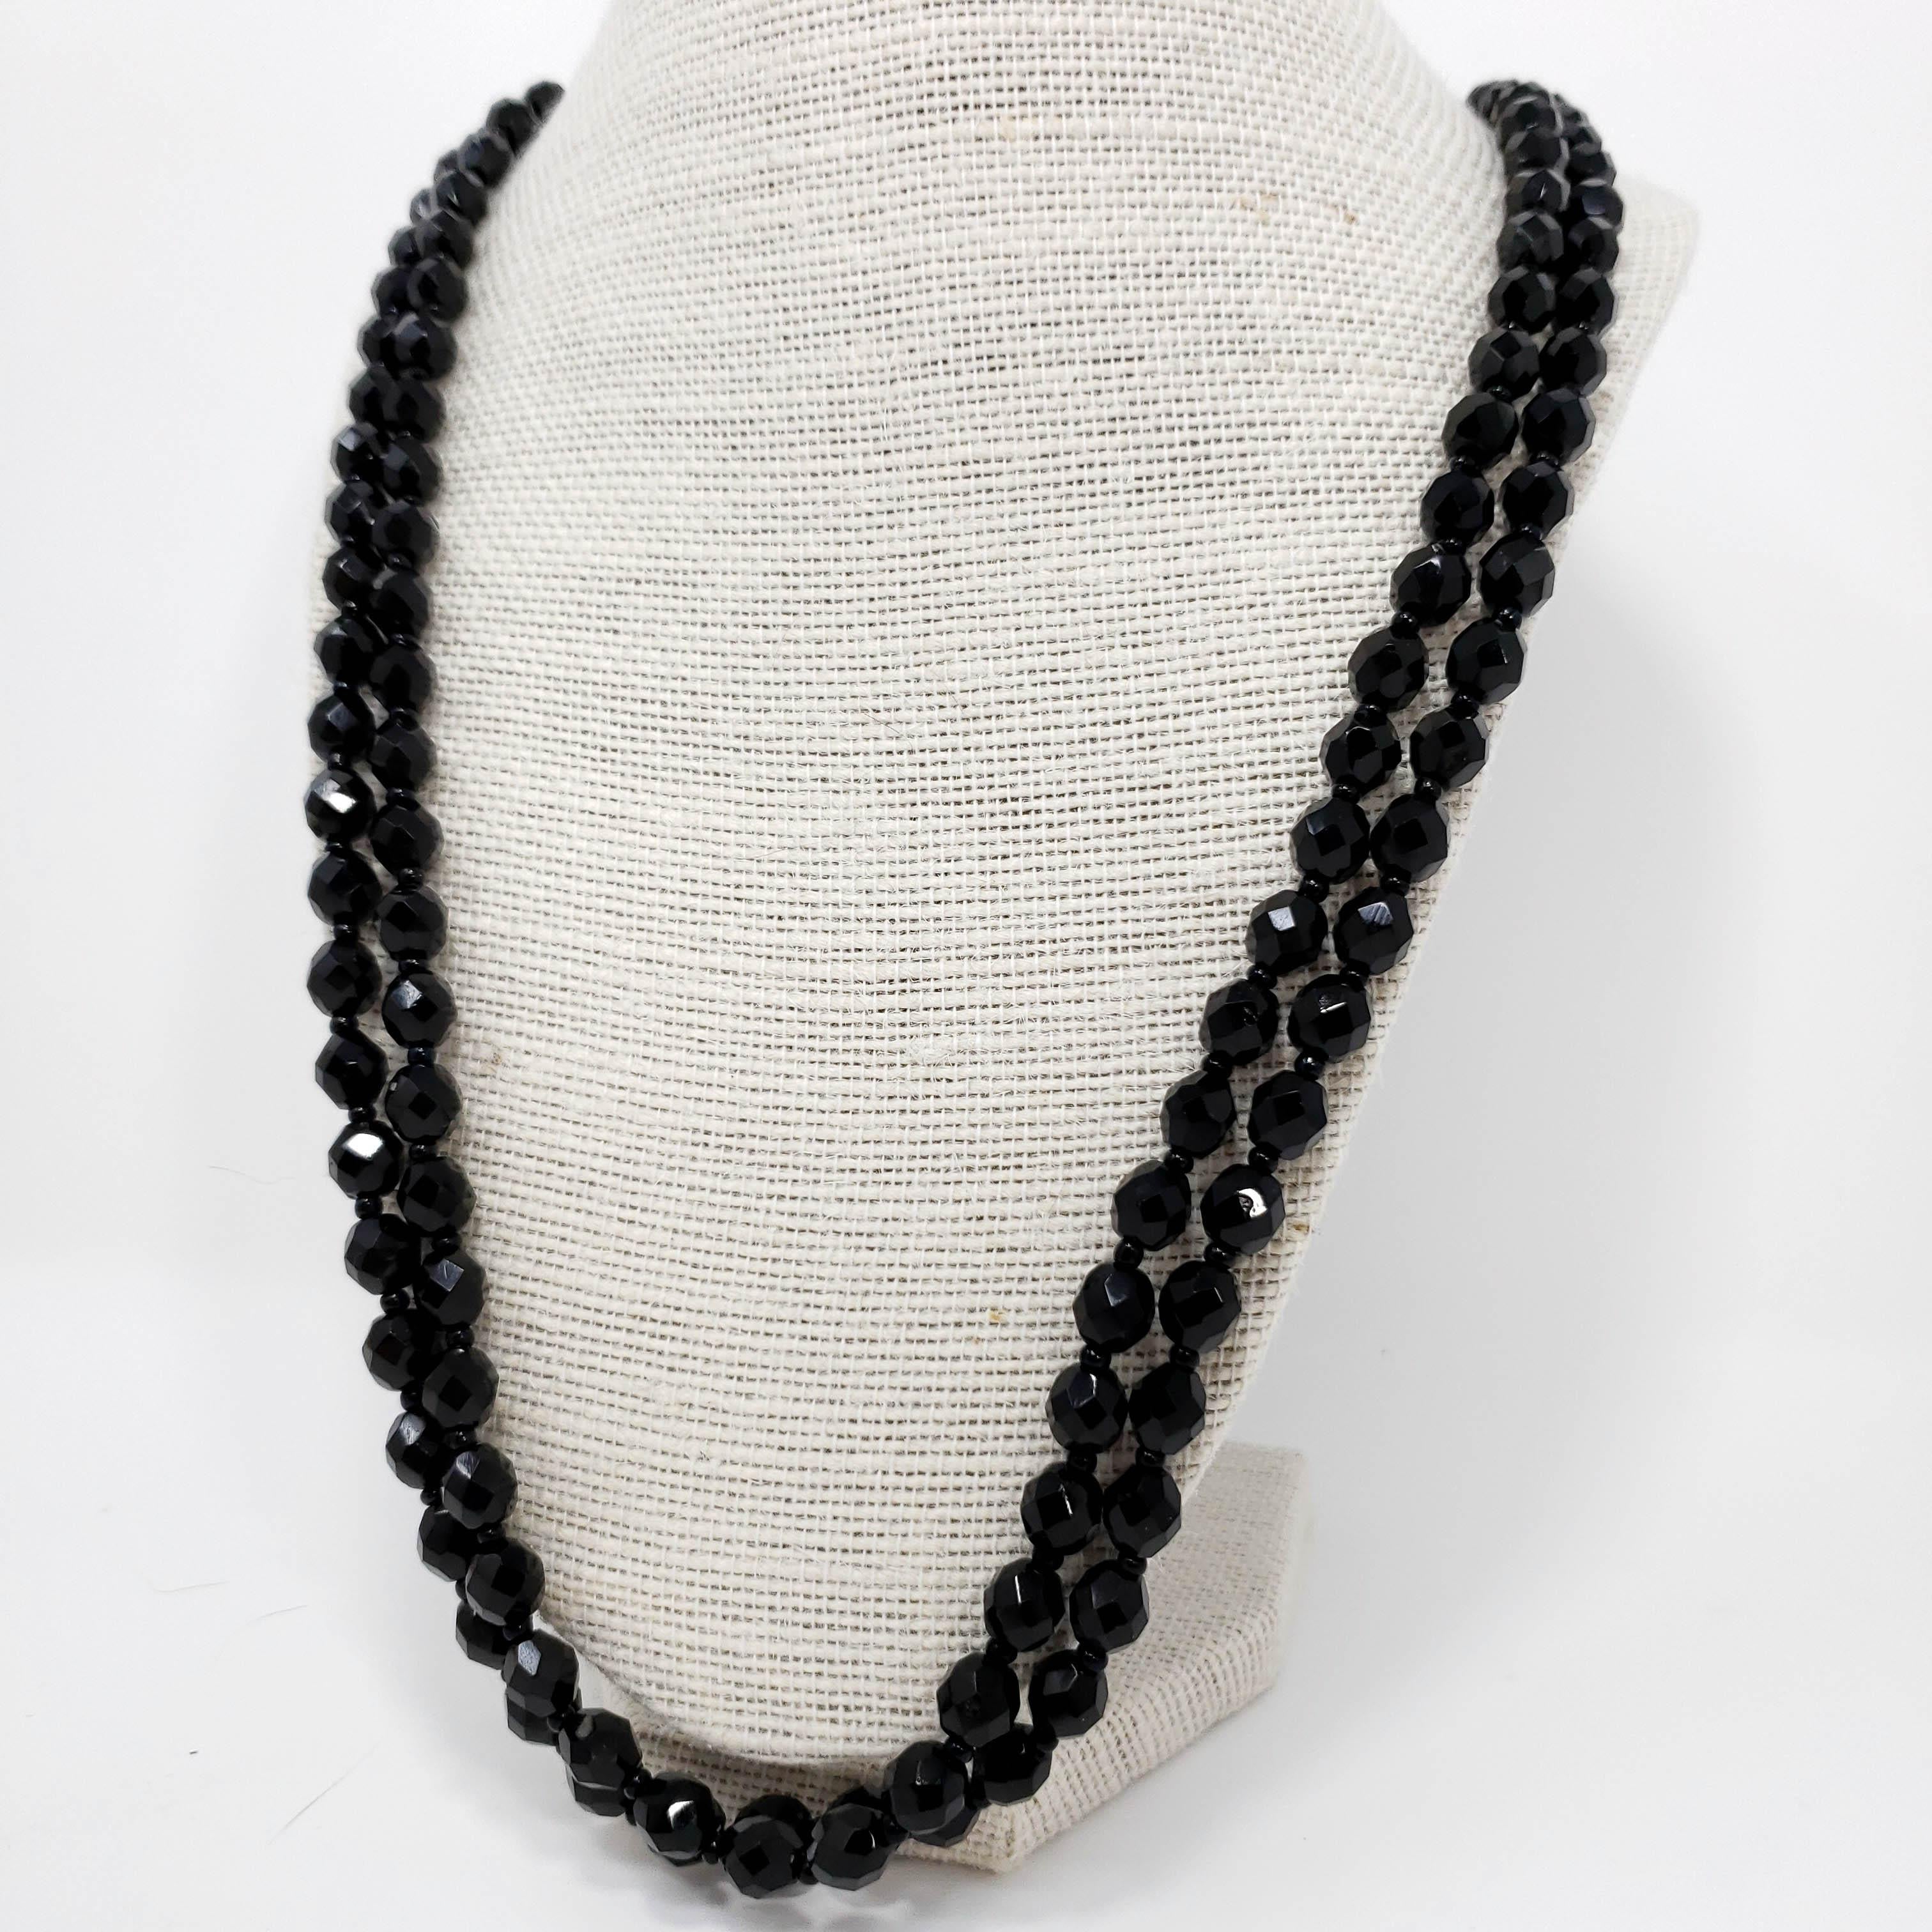 A chic vintage necklace! A single strand of jet-black Czech crystals fastened with a goldtone springring clasp. A simple and stylish long (60 in / 148 cm) rope necklace which can be worn single or double stranded.